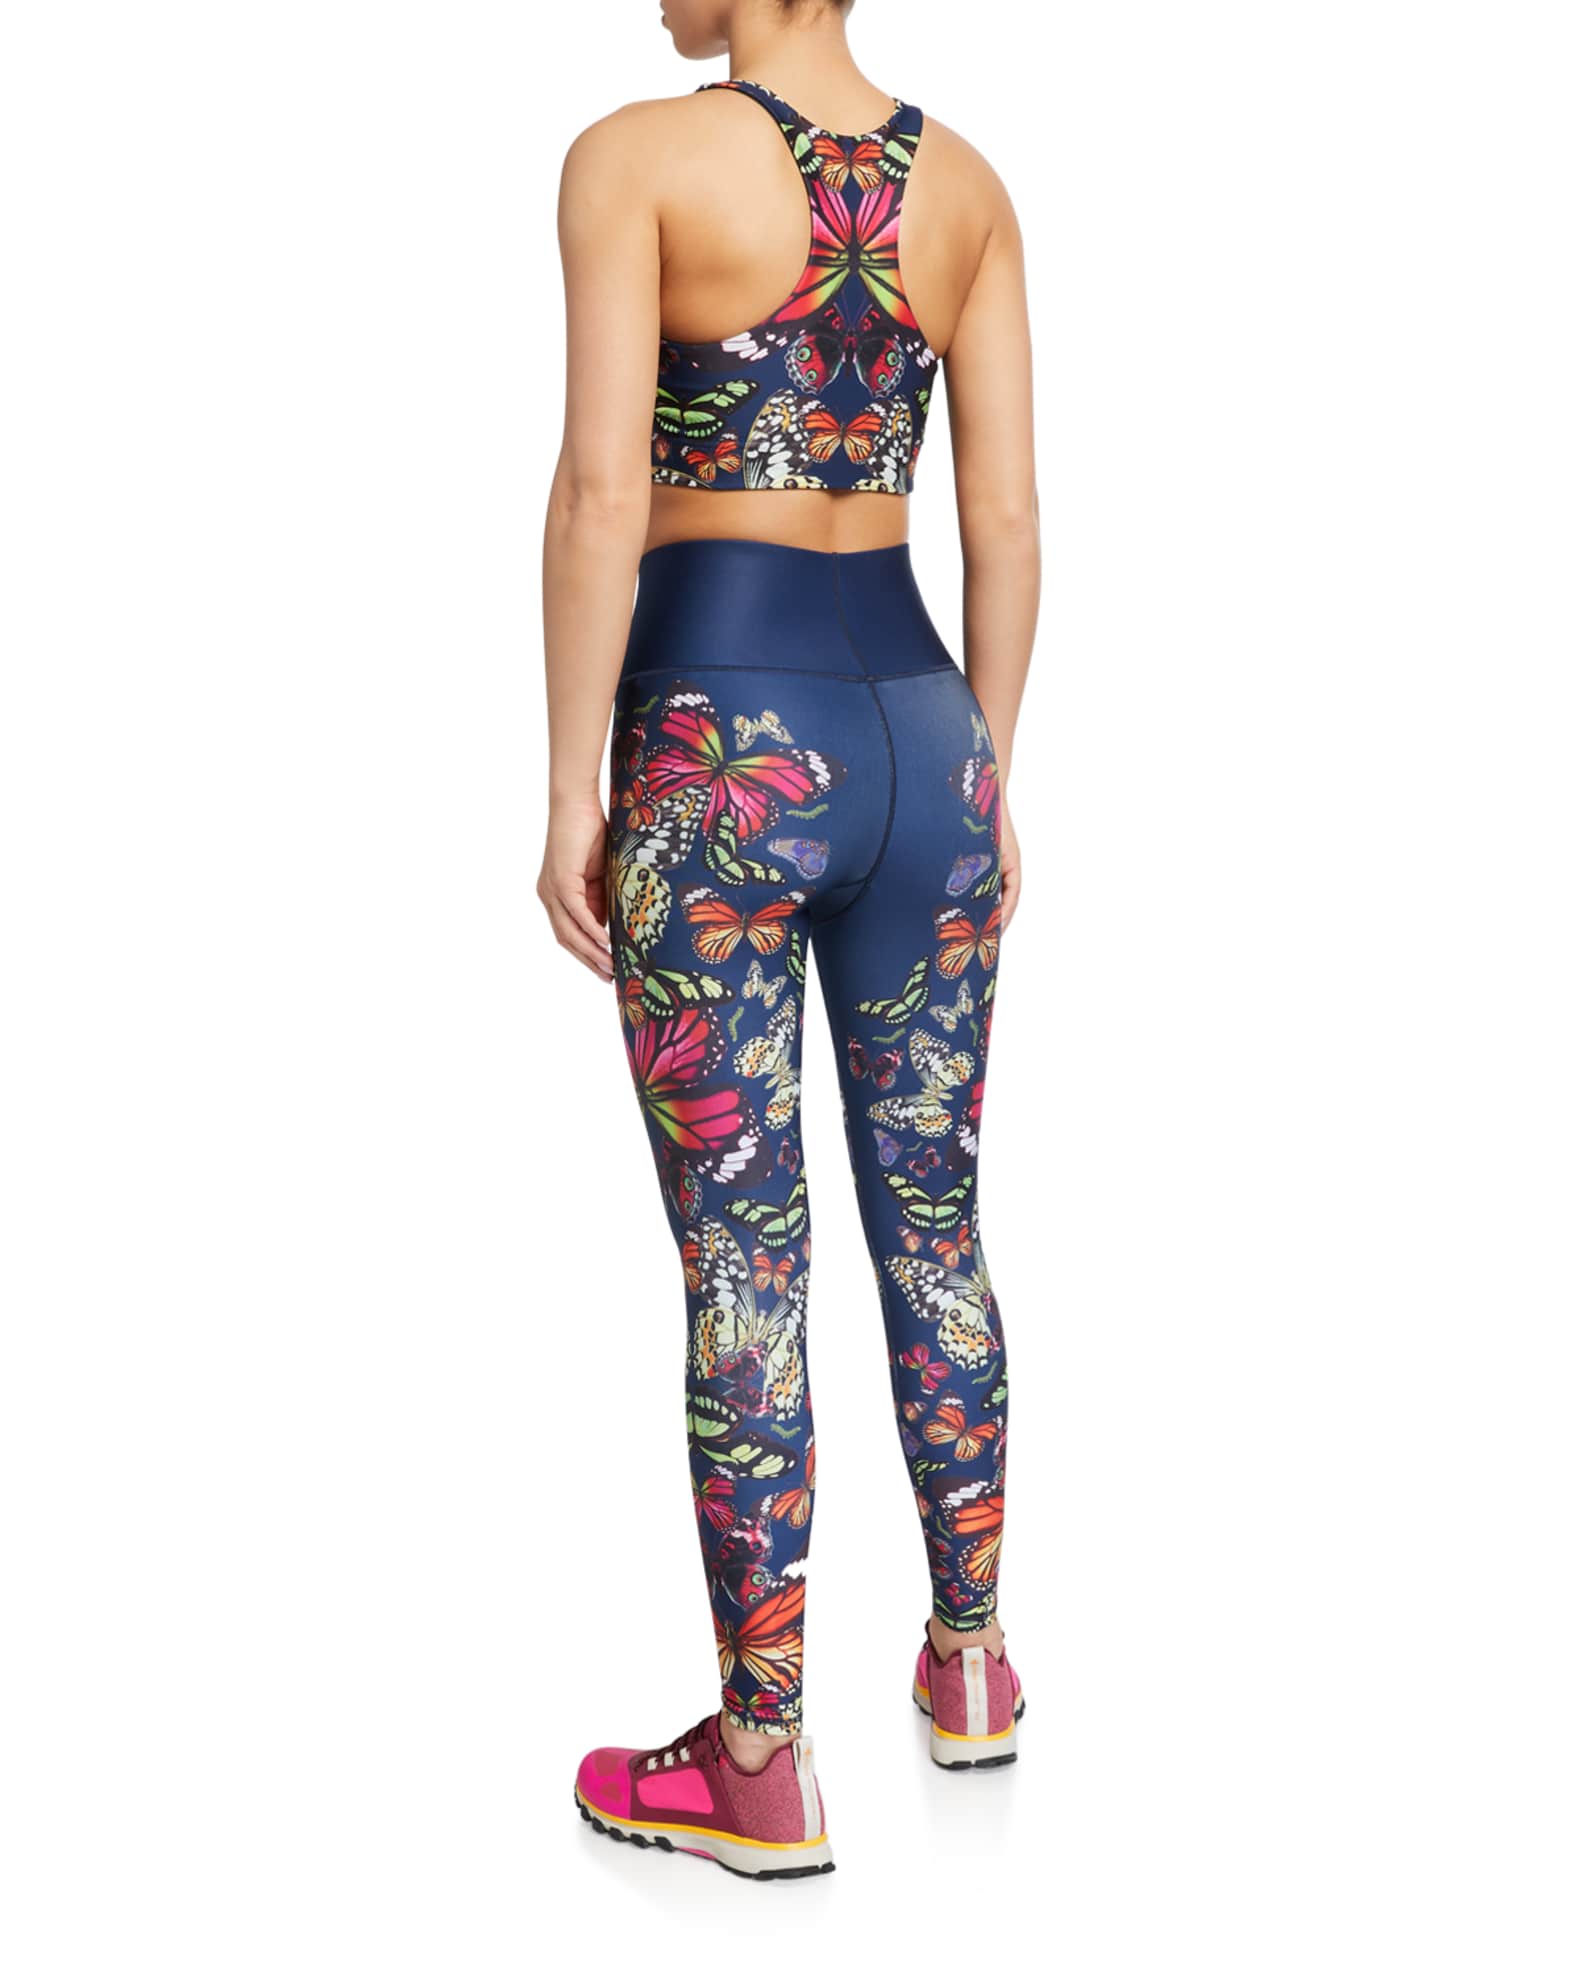 Kaleidofly Printed Double-Knit Active Leggings and Matching Items